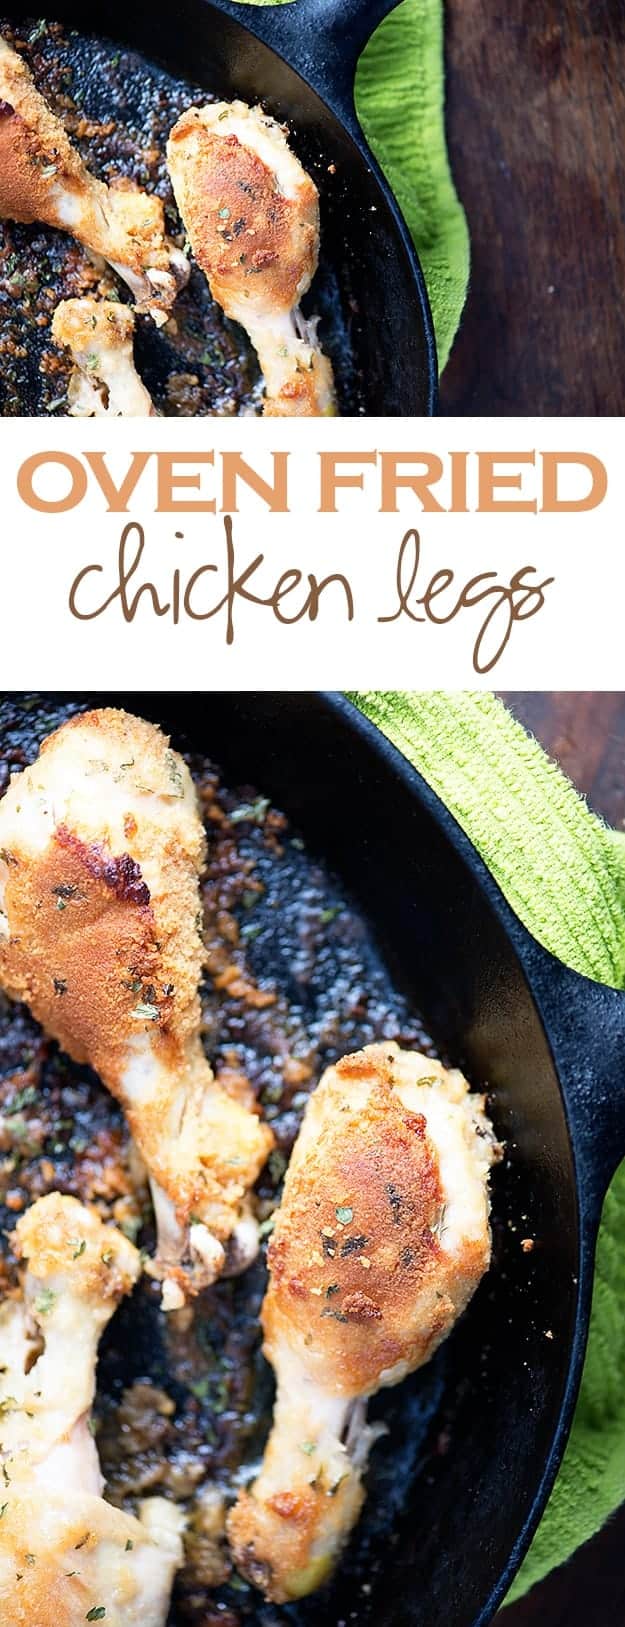 Crispy, crunchy, and fried to perfection right in the oven! This juicy chicken recipe is so easy and kids love it!